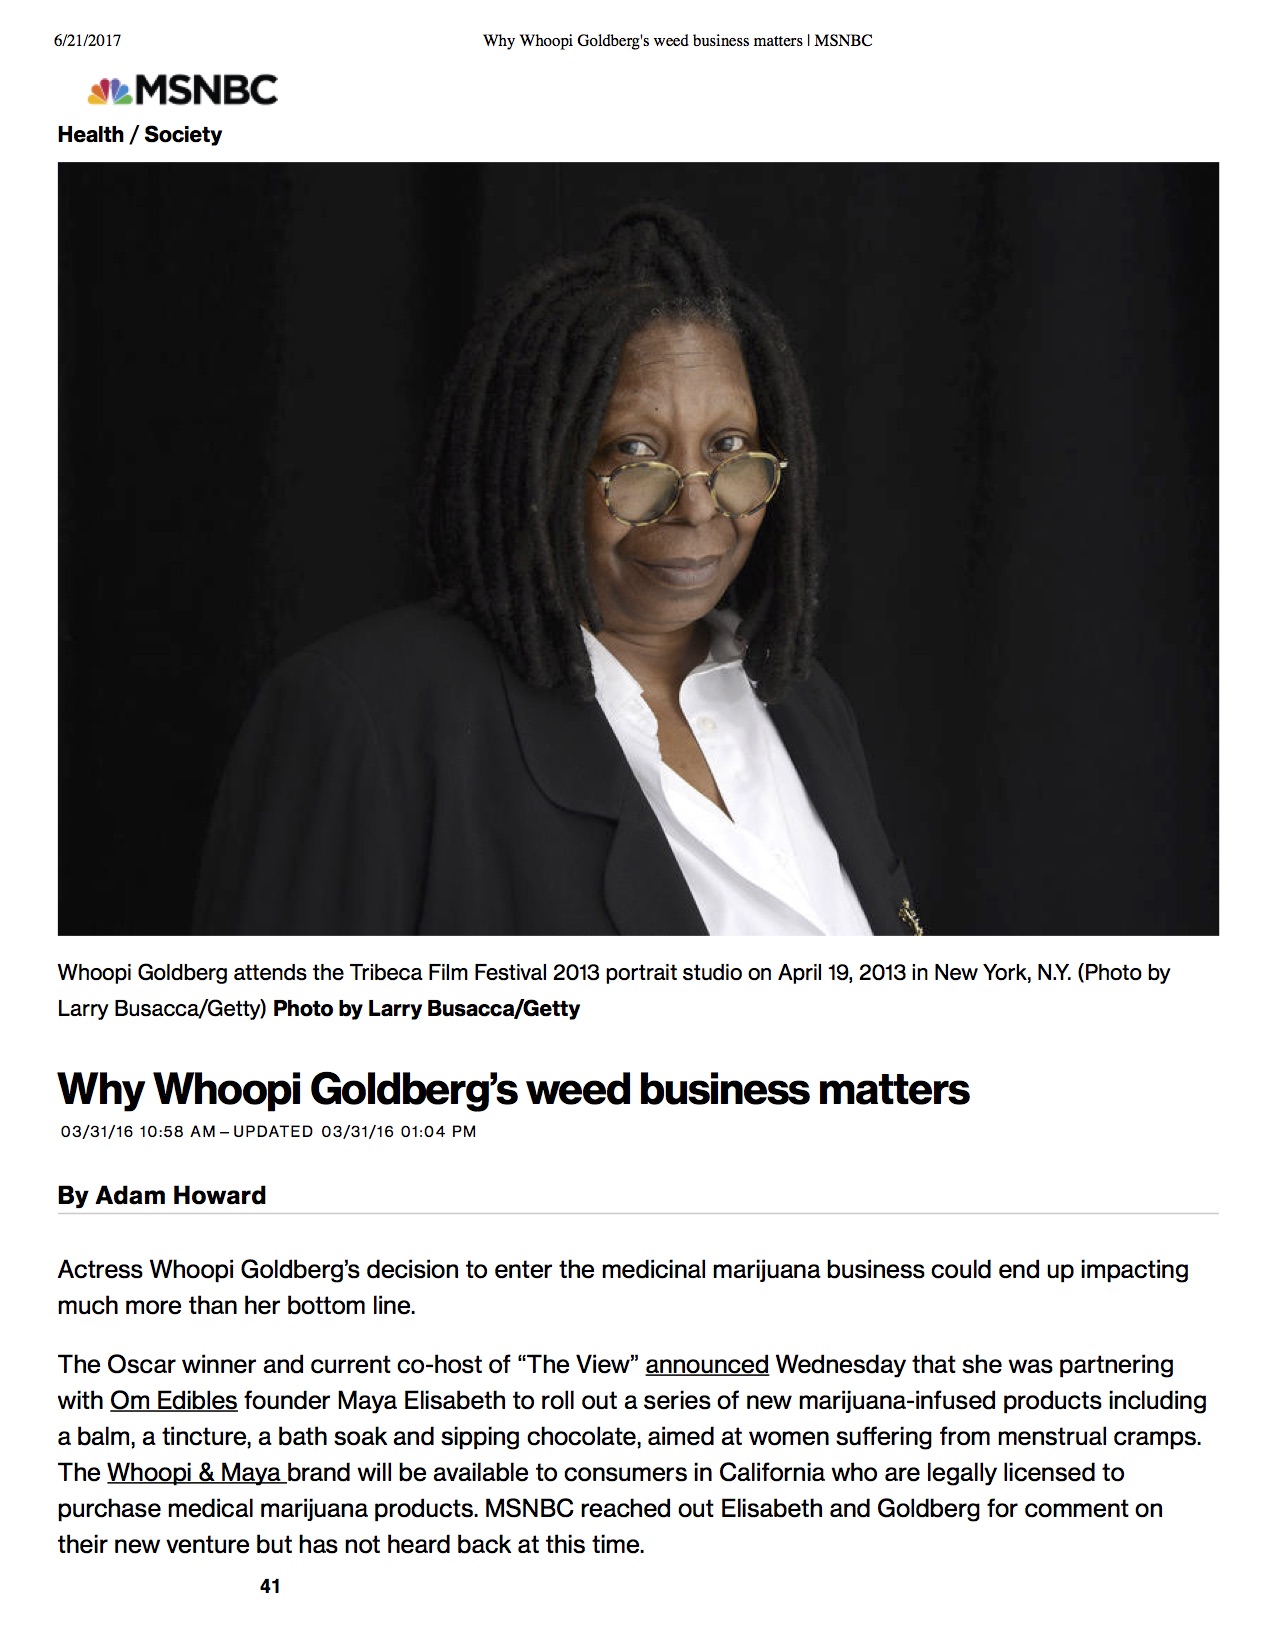 1Why Whoopi Goldberg's weed business matters _ MSNBC.jpg